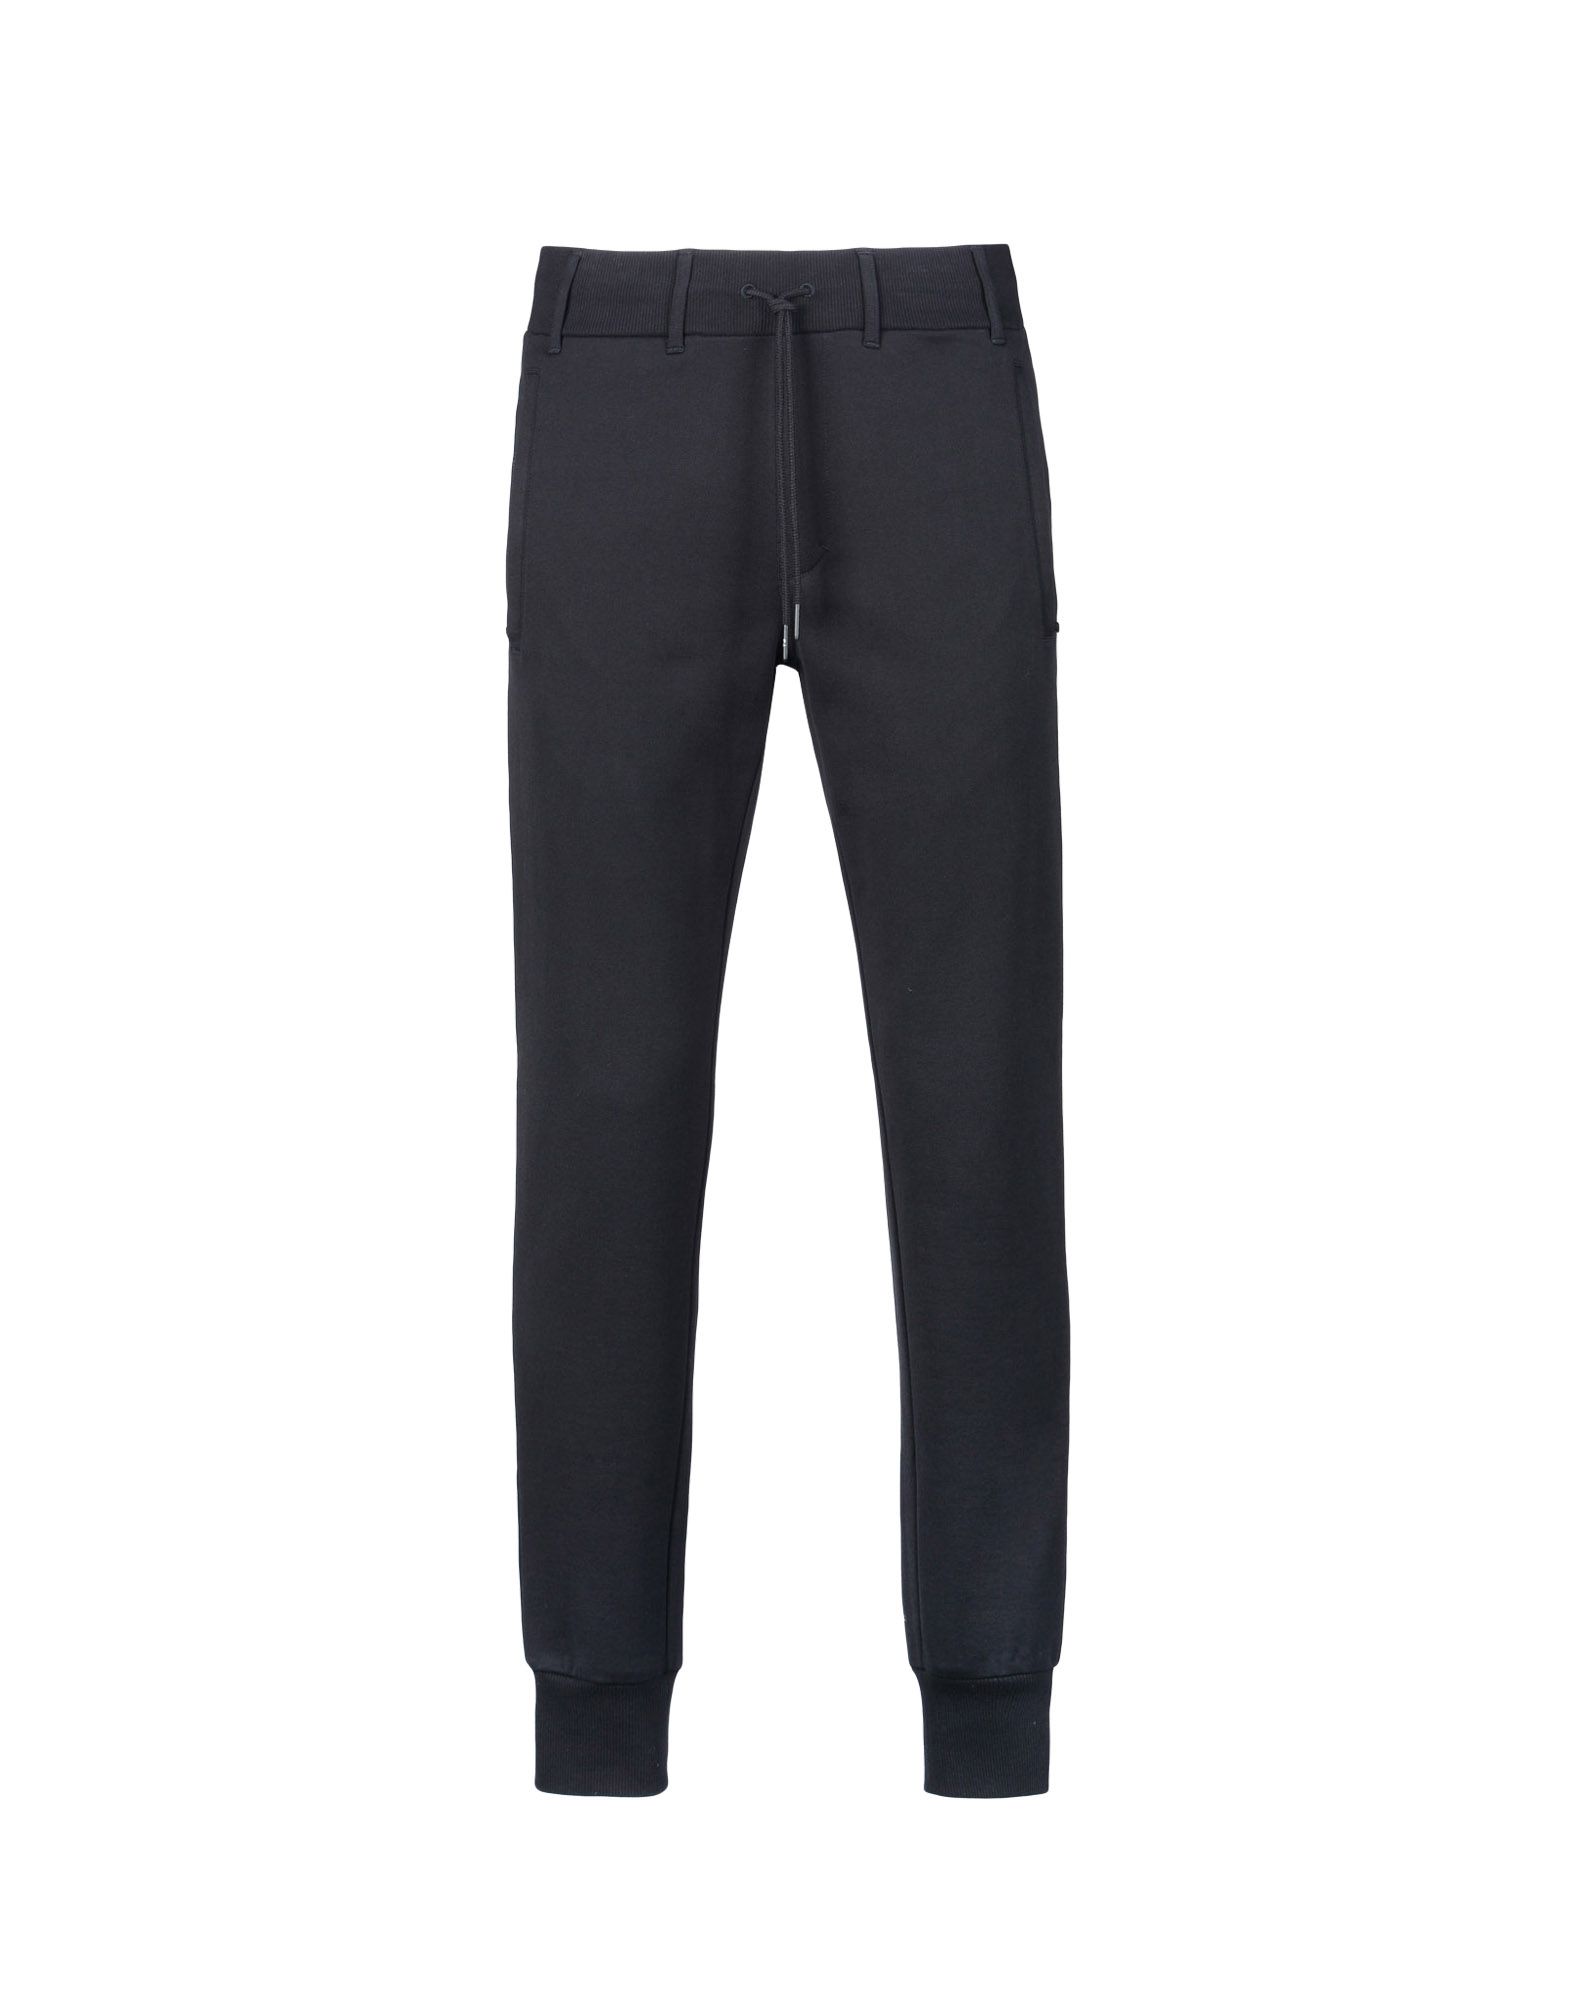 Y 3 CLASSIC FT CUFF PANT for Men | Adidas Y-3 Official Store